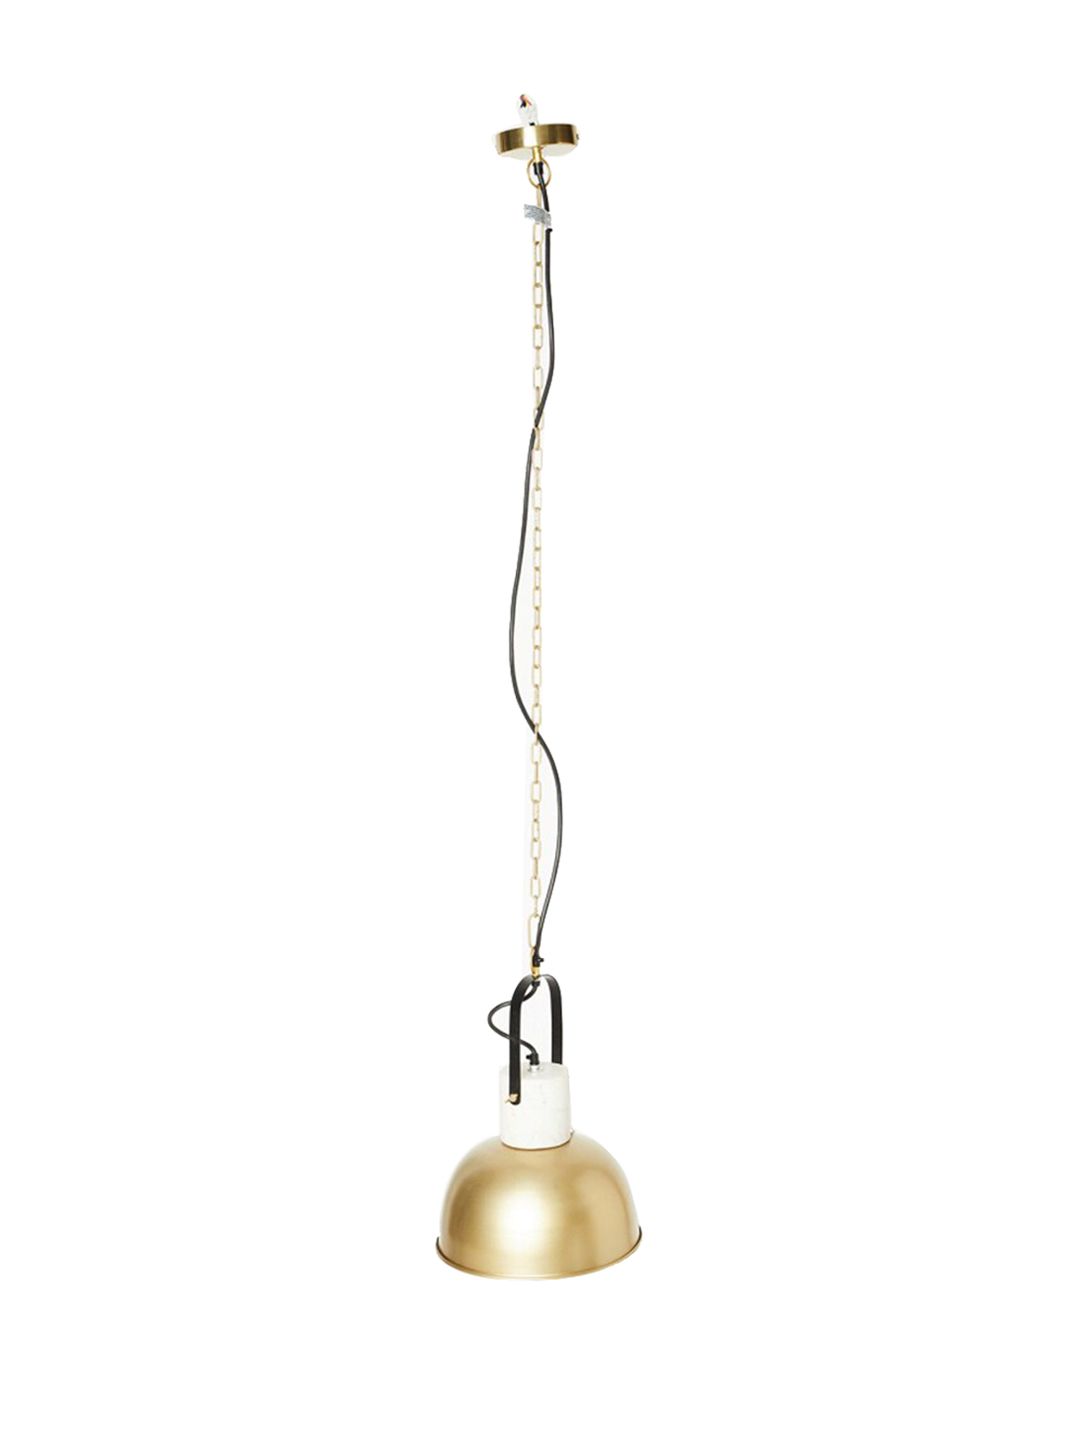 Home Centre Gold-Toned Solid  Fiesta Melisa Metal Pendant Light Price in India